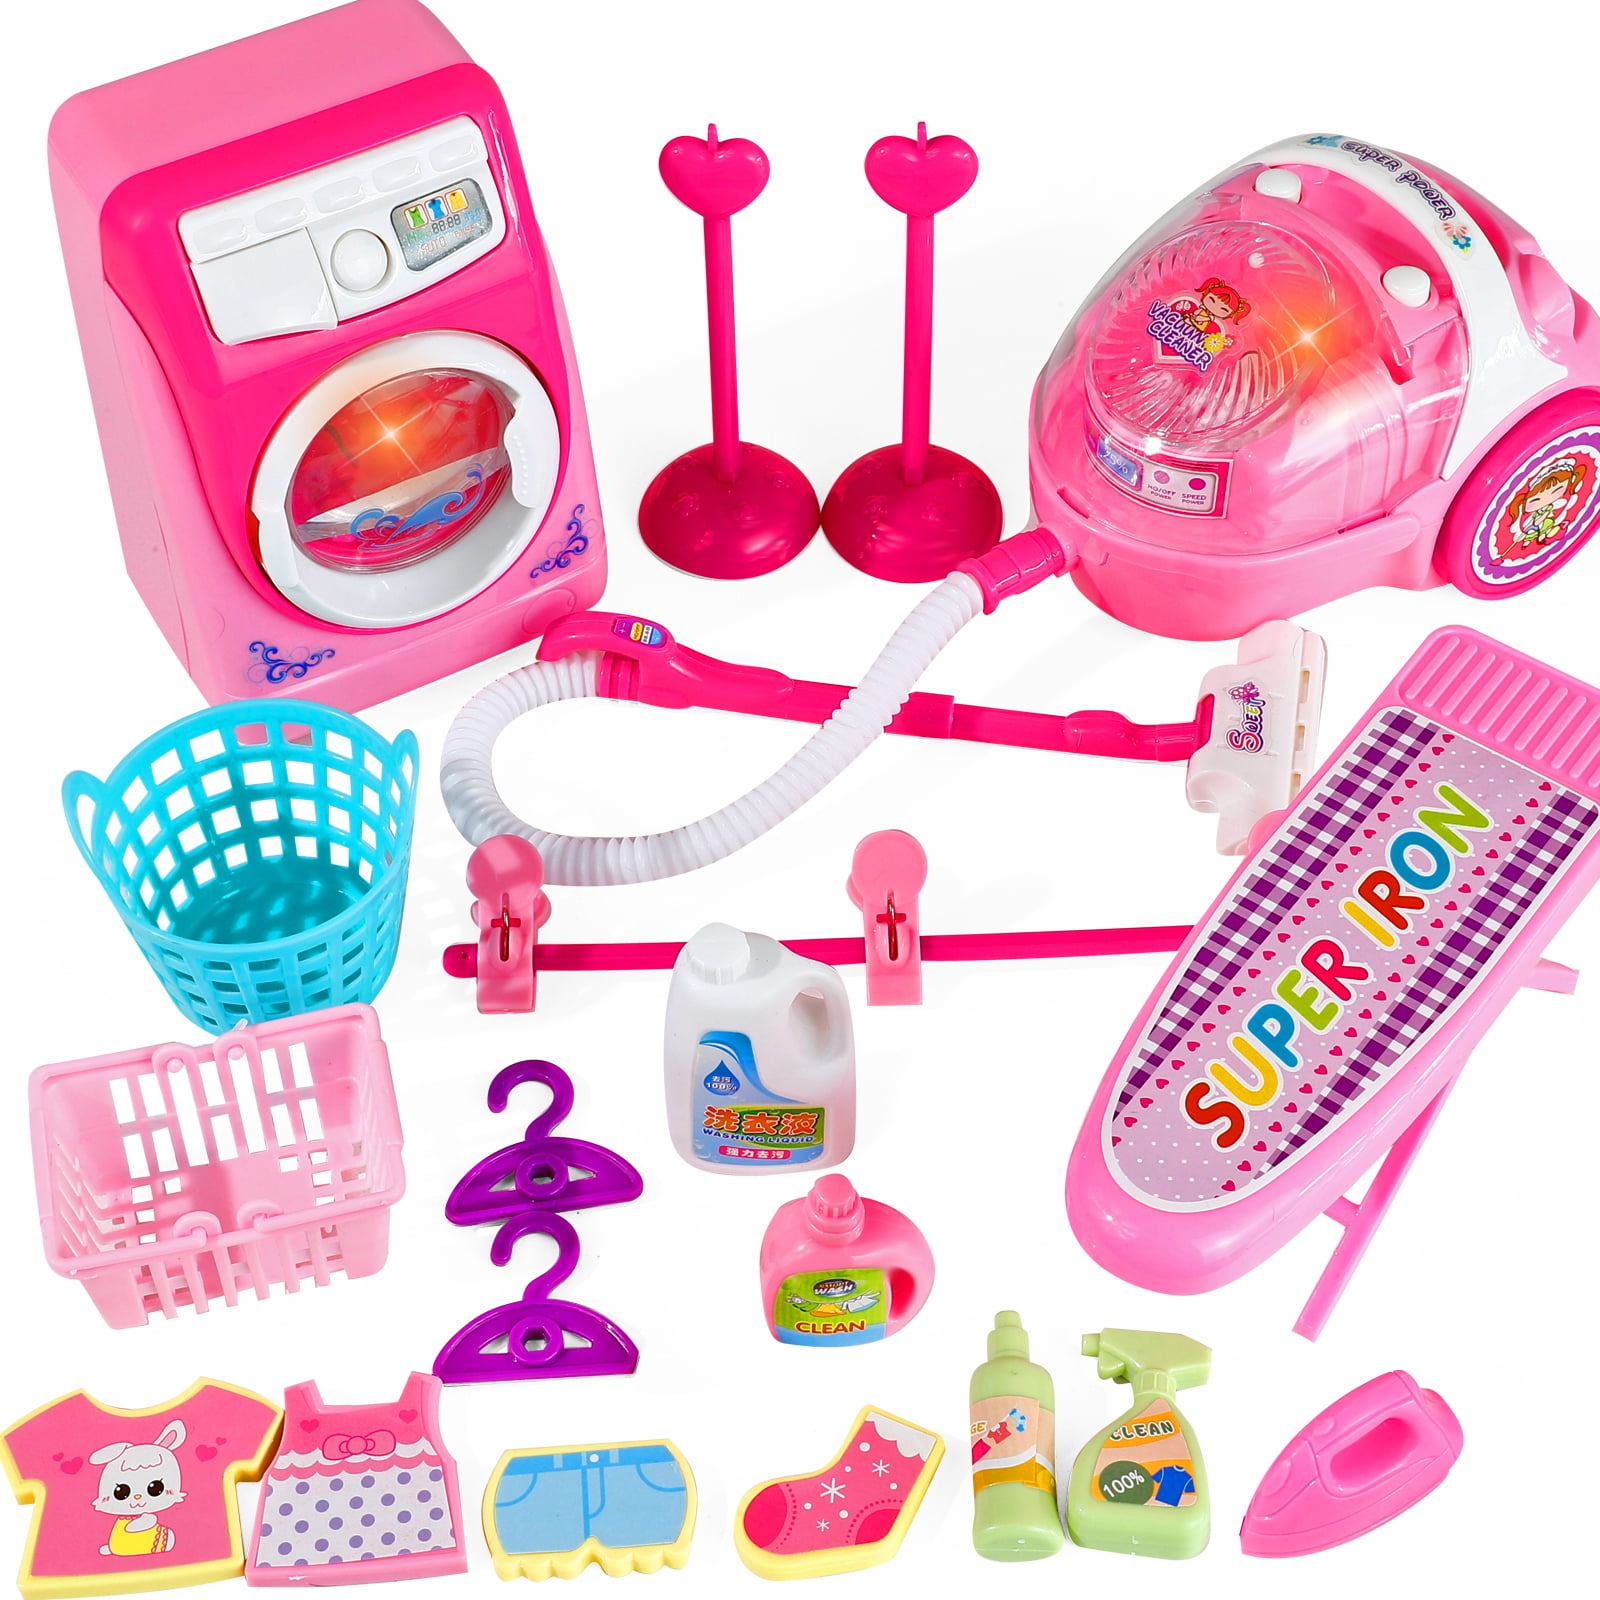 NETNEW Kids Cleaning Set Toys for Girls Boys 3-6 Years Pretend